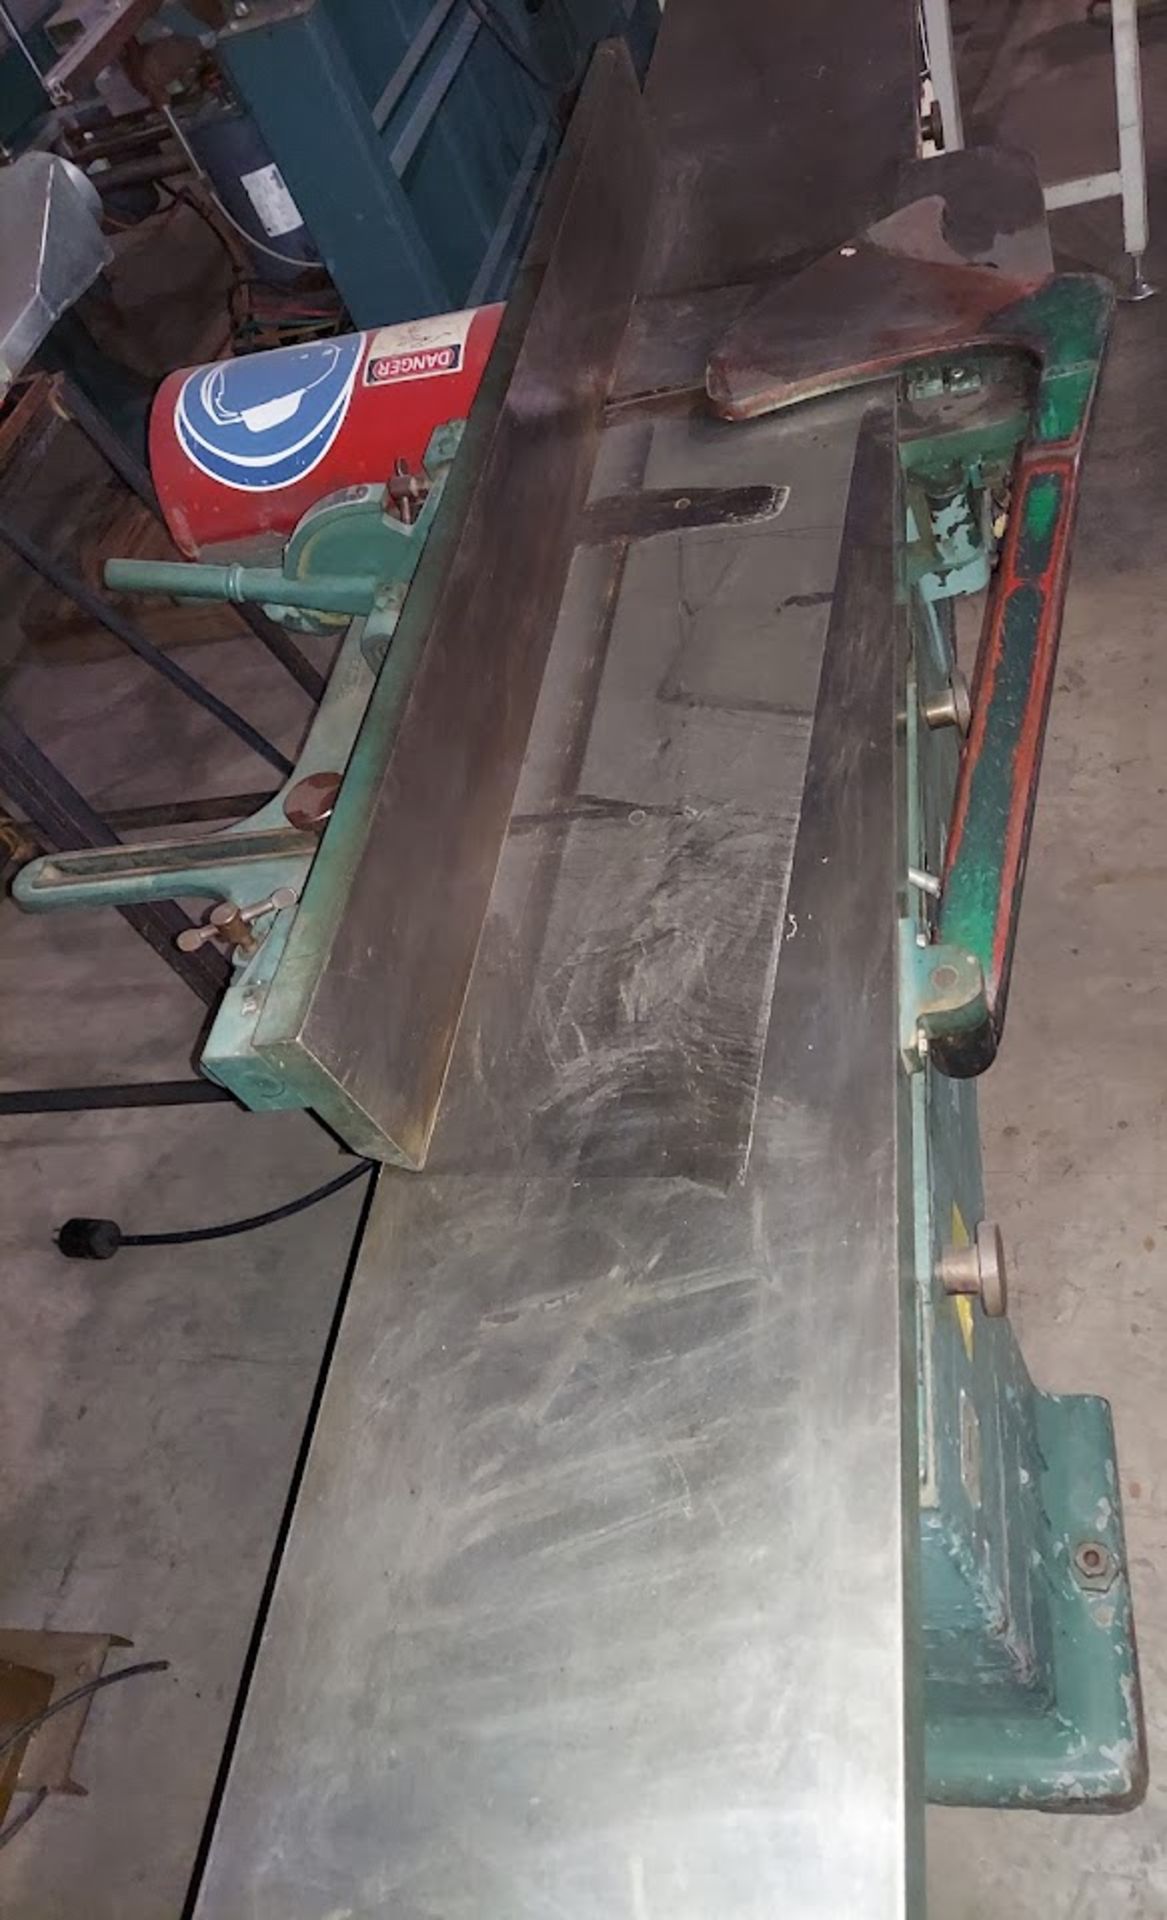 Oliver 12" Jointer, Model #116-B, Motor is 5 HP 3ph - Image 3 of 4